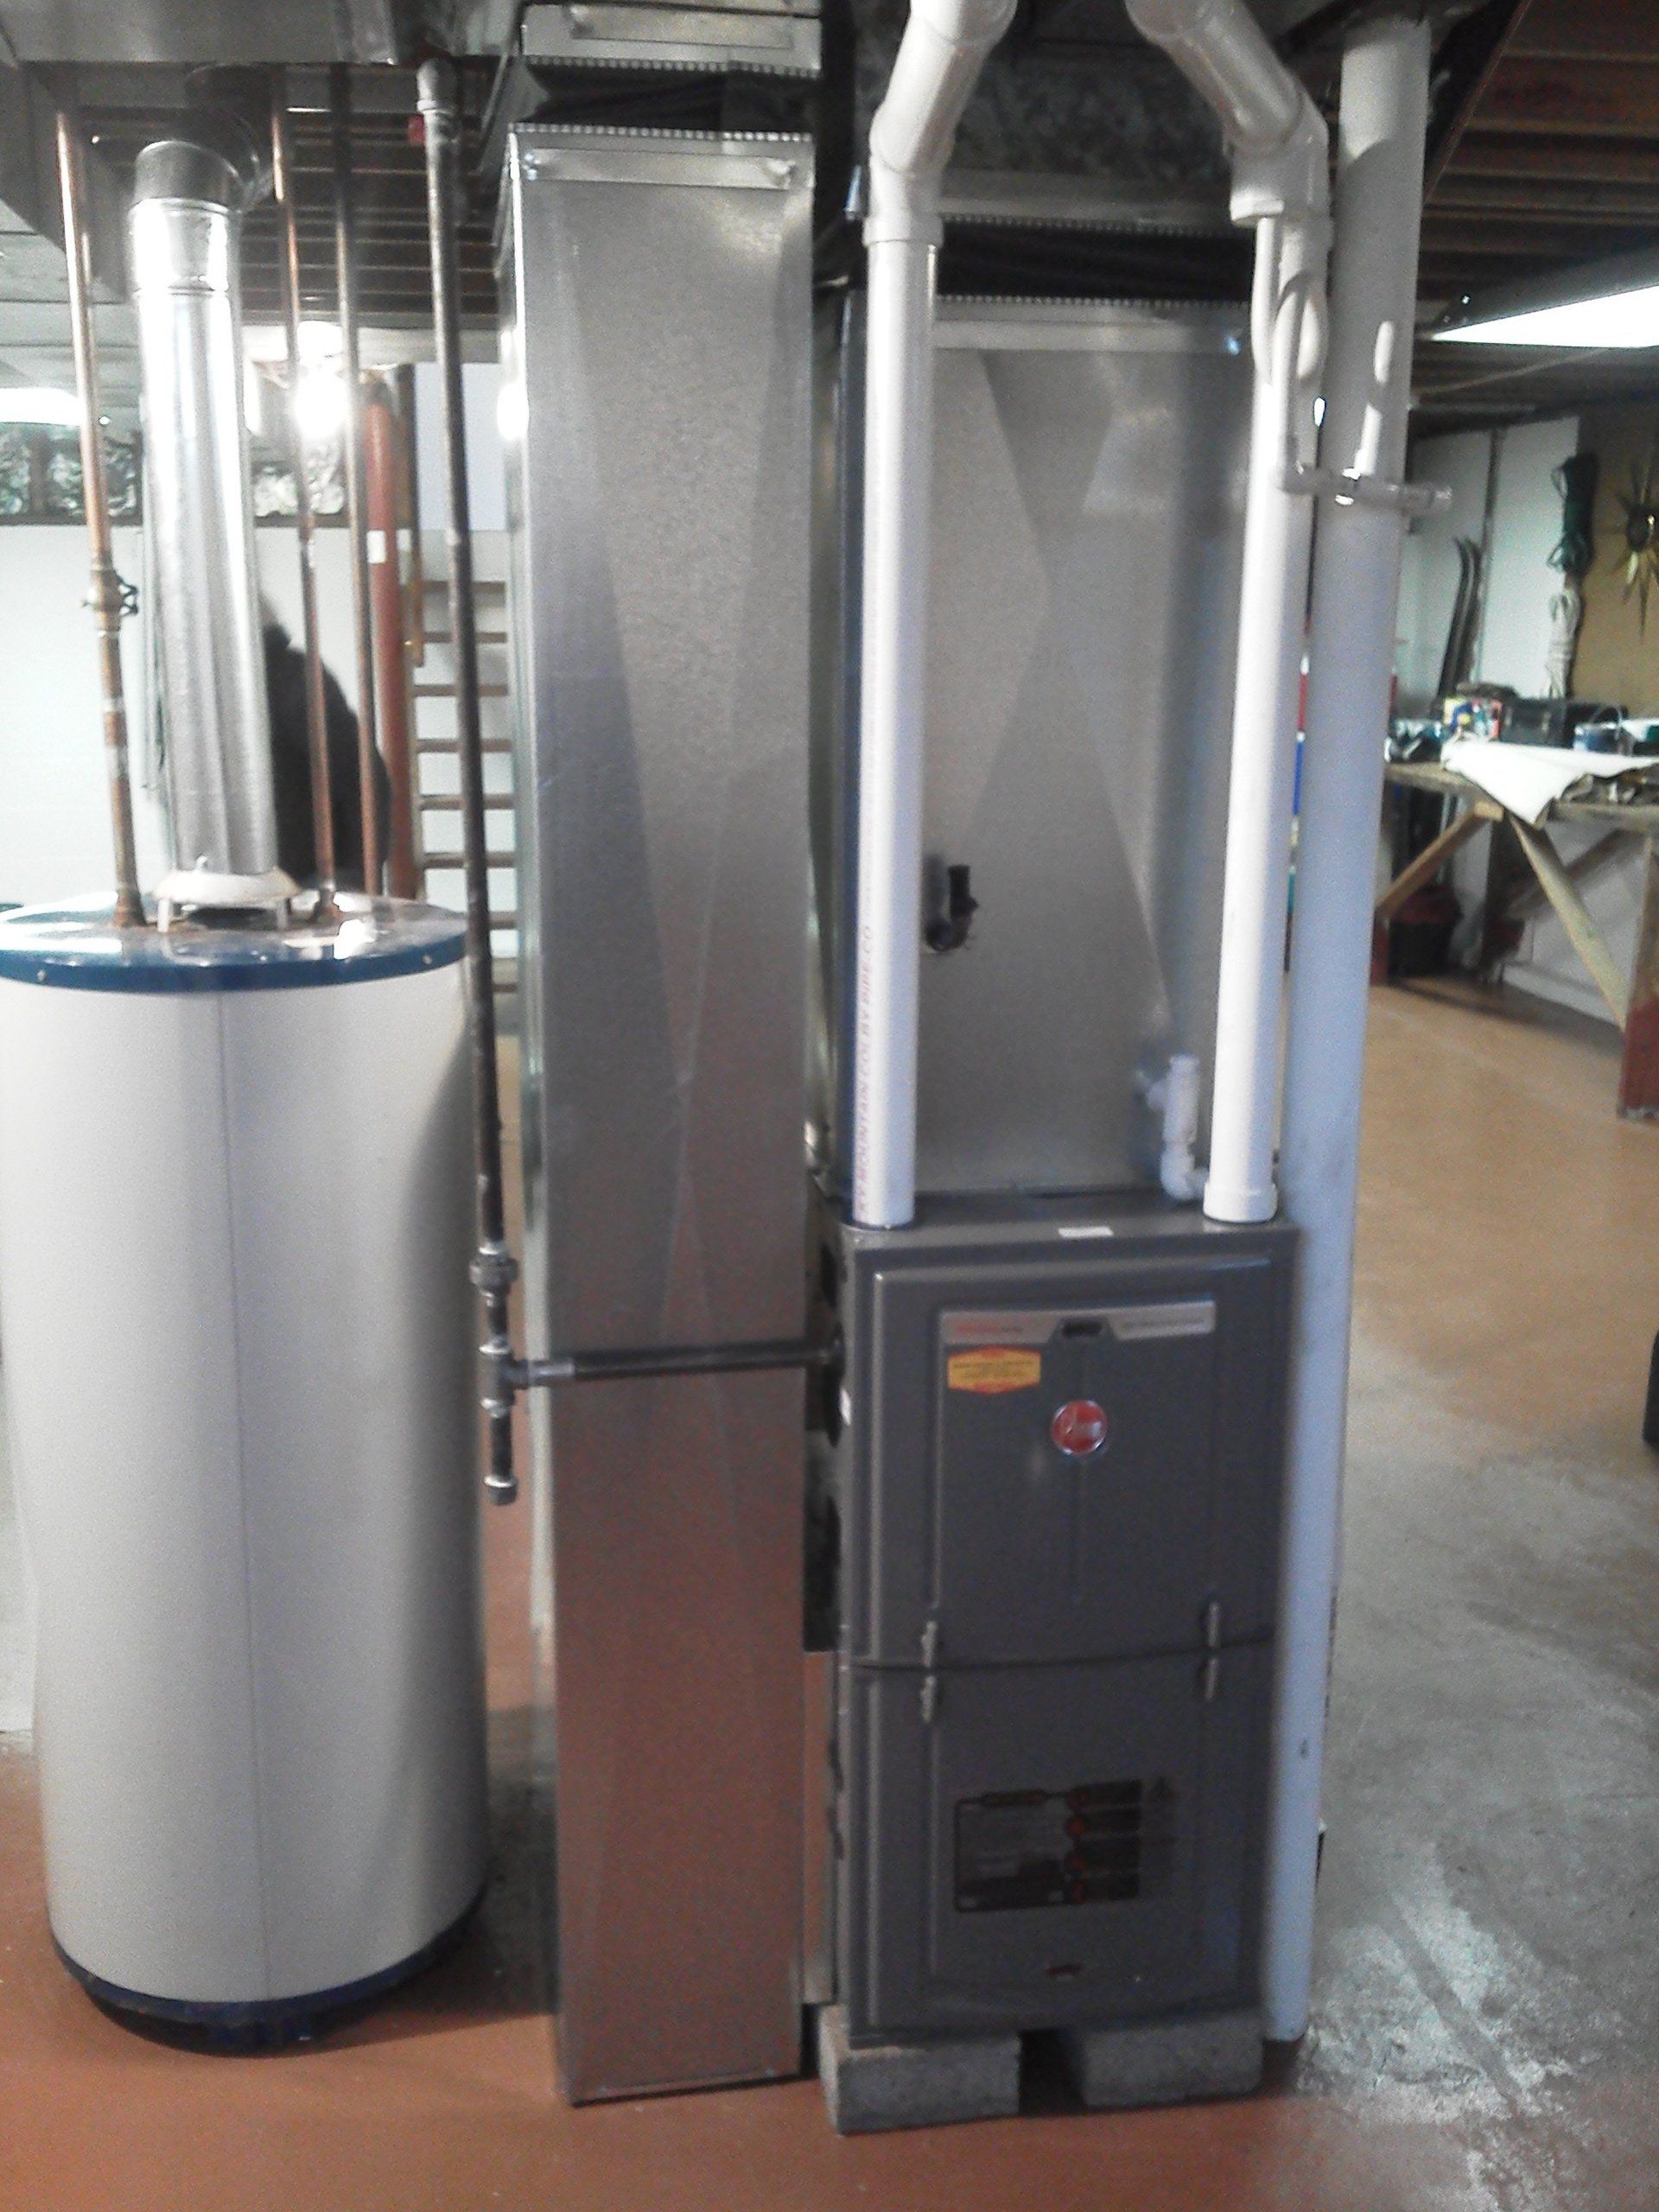 New Hot Air Furnace & duct work in Saratoga Springs, NY